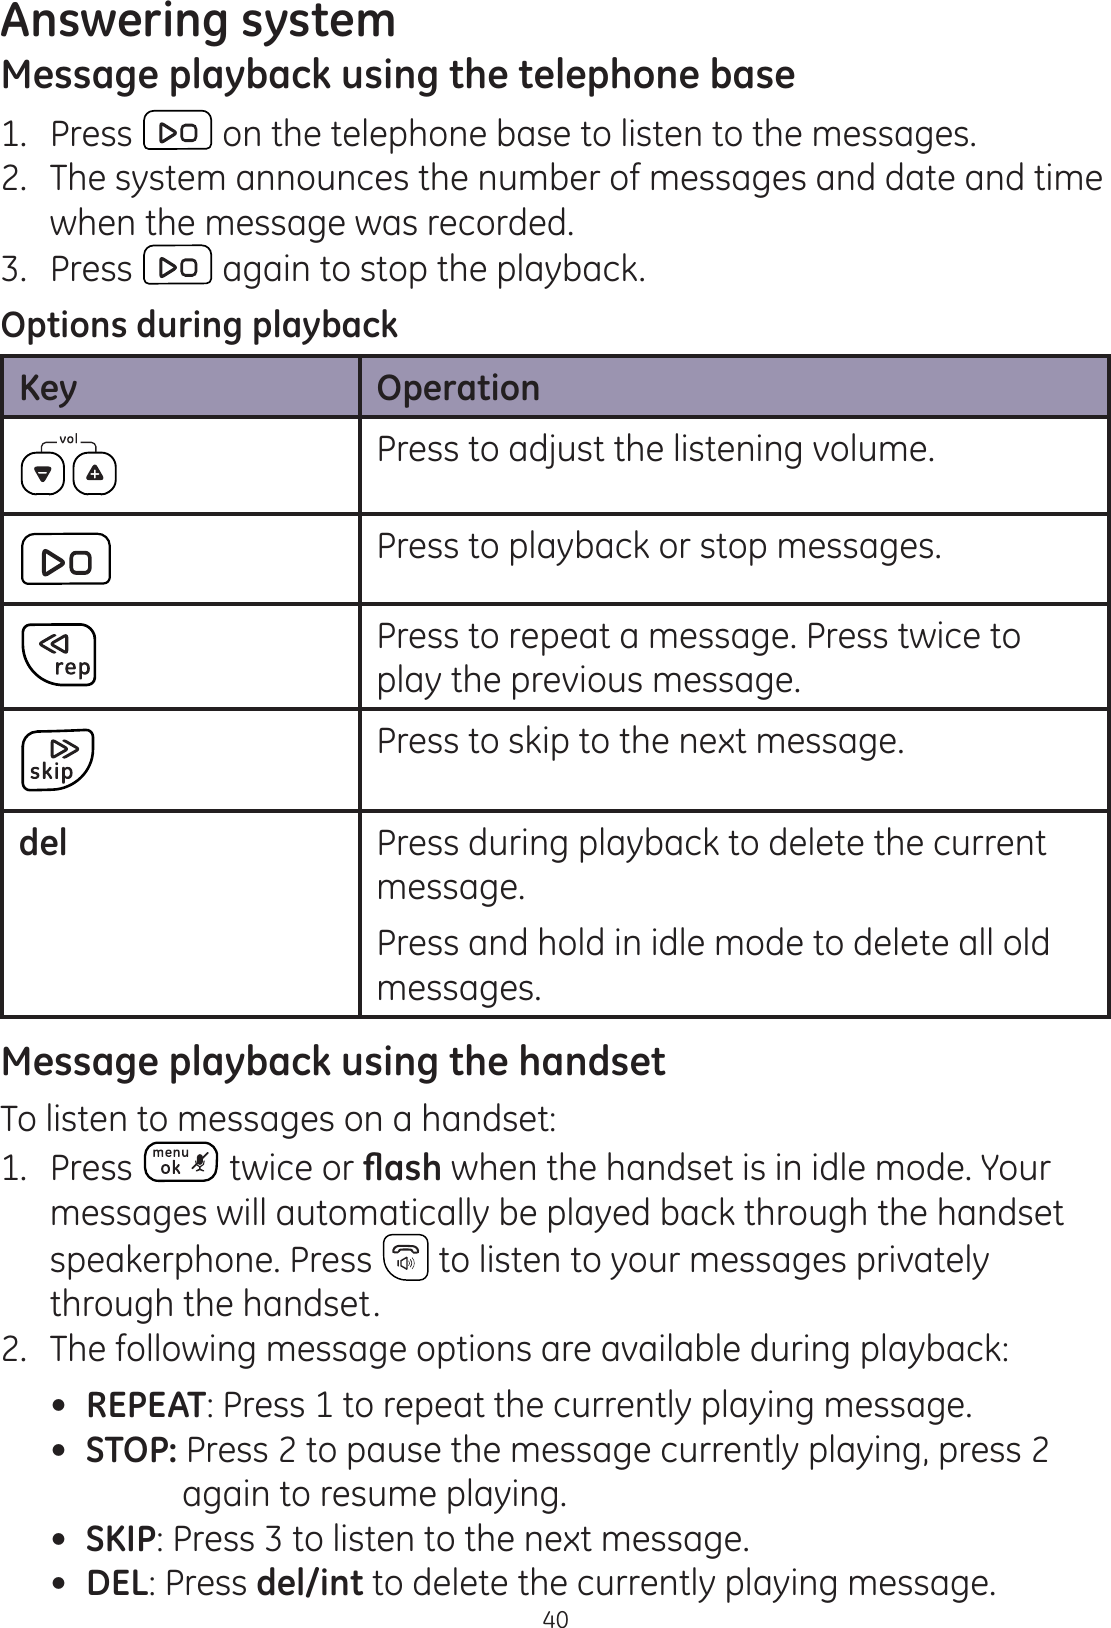 Answering system40Message playback using the telephone base1.  Press   on the telephone base to listen to the messages. 2.  The system announces the number of messages and date and time when the message was recorded. 3.  Press  again to stop the playback. Options during playbackKey OperationPress to adjust the listening volume.Press to playback or stop messages.Press to repeat a message. Press twice to play the previous message.Press to skip to the next message.del Press during playback to delete the current message.Press and hold in idle mode to delete all old messages. Message playback using the handsetTo listen to messages on a handset:1.  Press   twice or ÀDVK when the handset is in idle mode. Your messages will automatically be played back through the handset speakerphone. Press   to listen to your messages privately through the handset. 2.  The following message options are available during playback: REPEAT: Press 1 to repeat the currently playing message. STOP: Press 2 to pause the message currently playing, press 2     again to resume playing.  SKIP: Press 3 to listen to the next message. DEL: Press del/int to delete the currently playing message. 